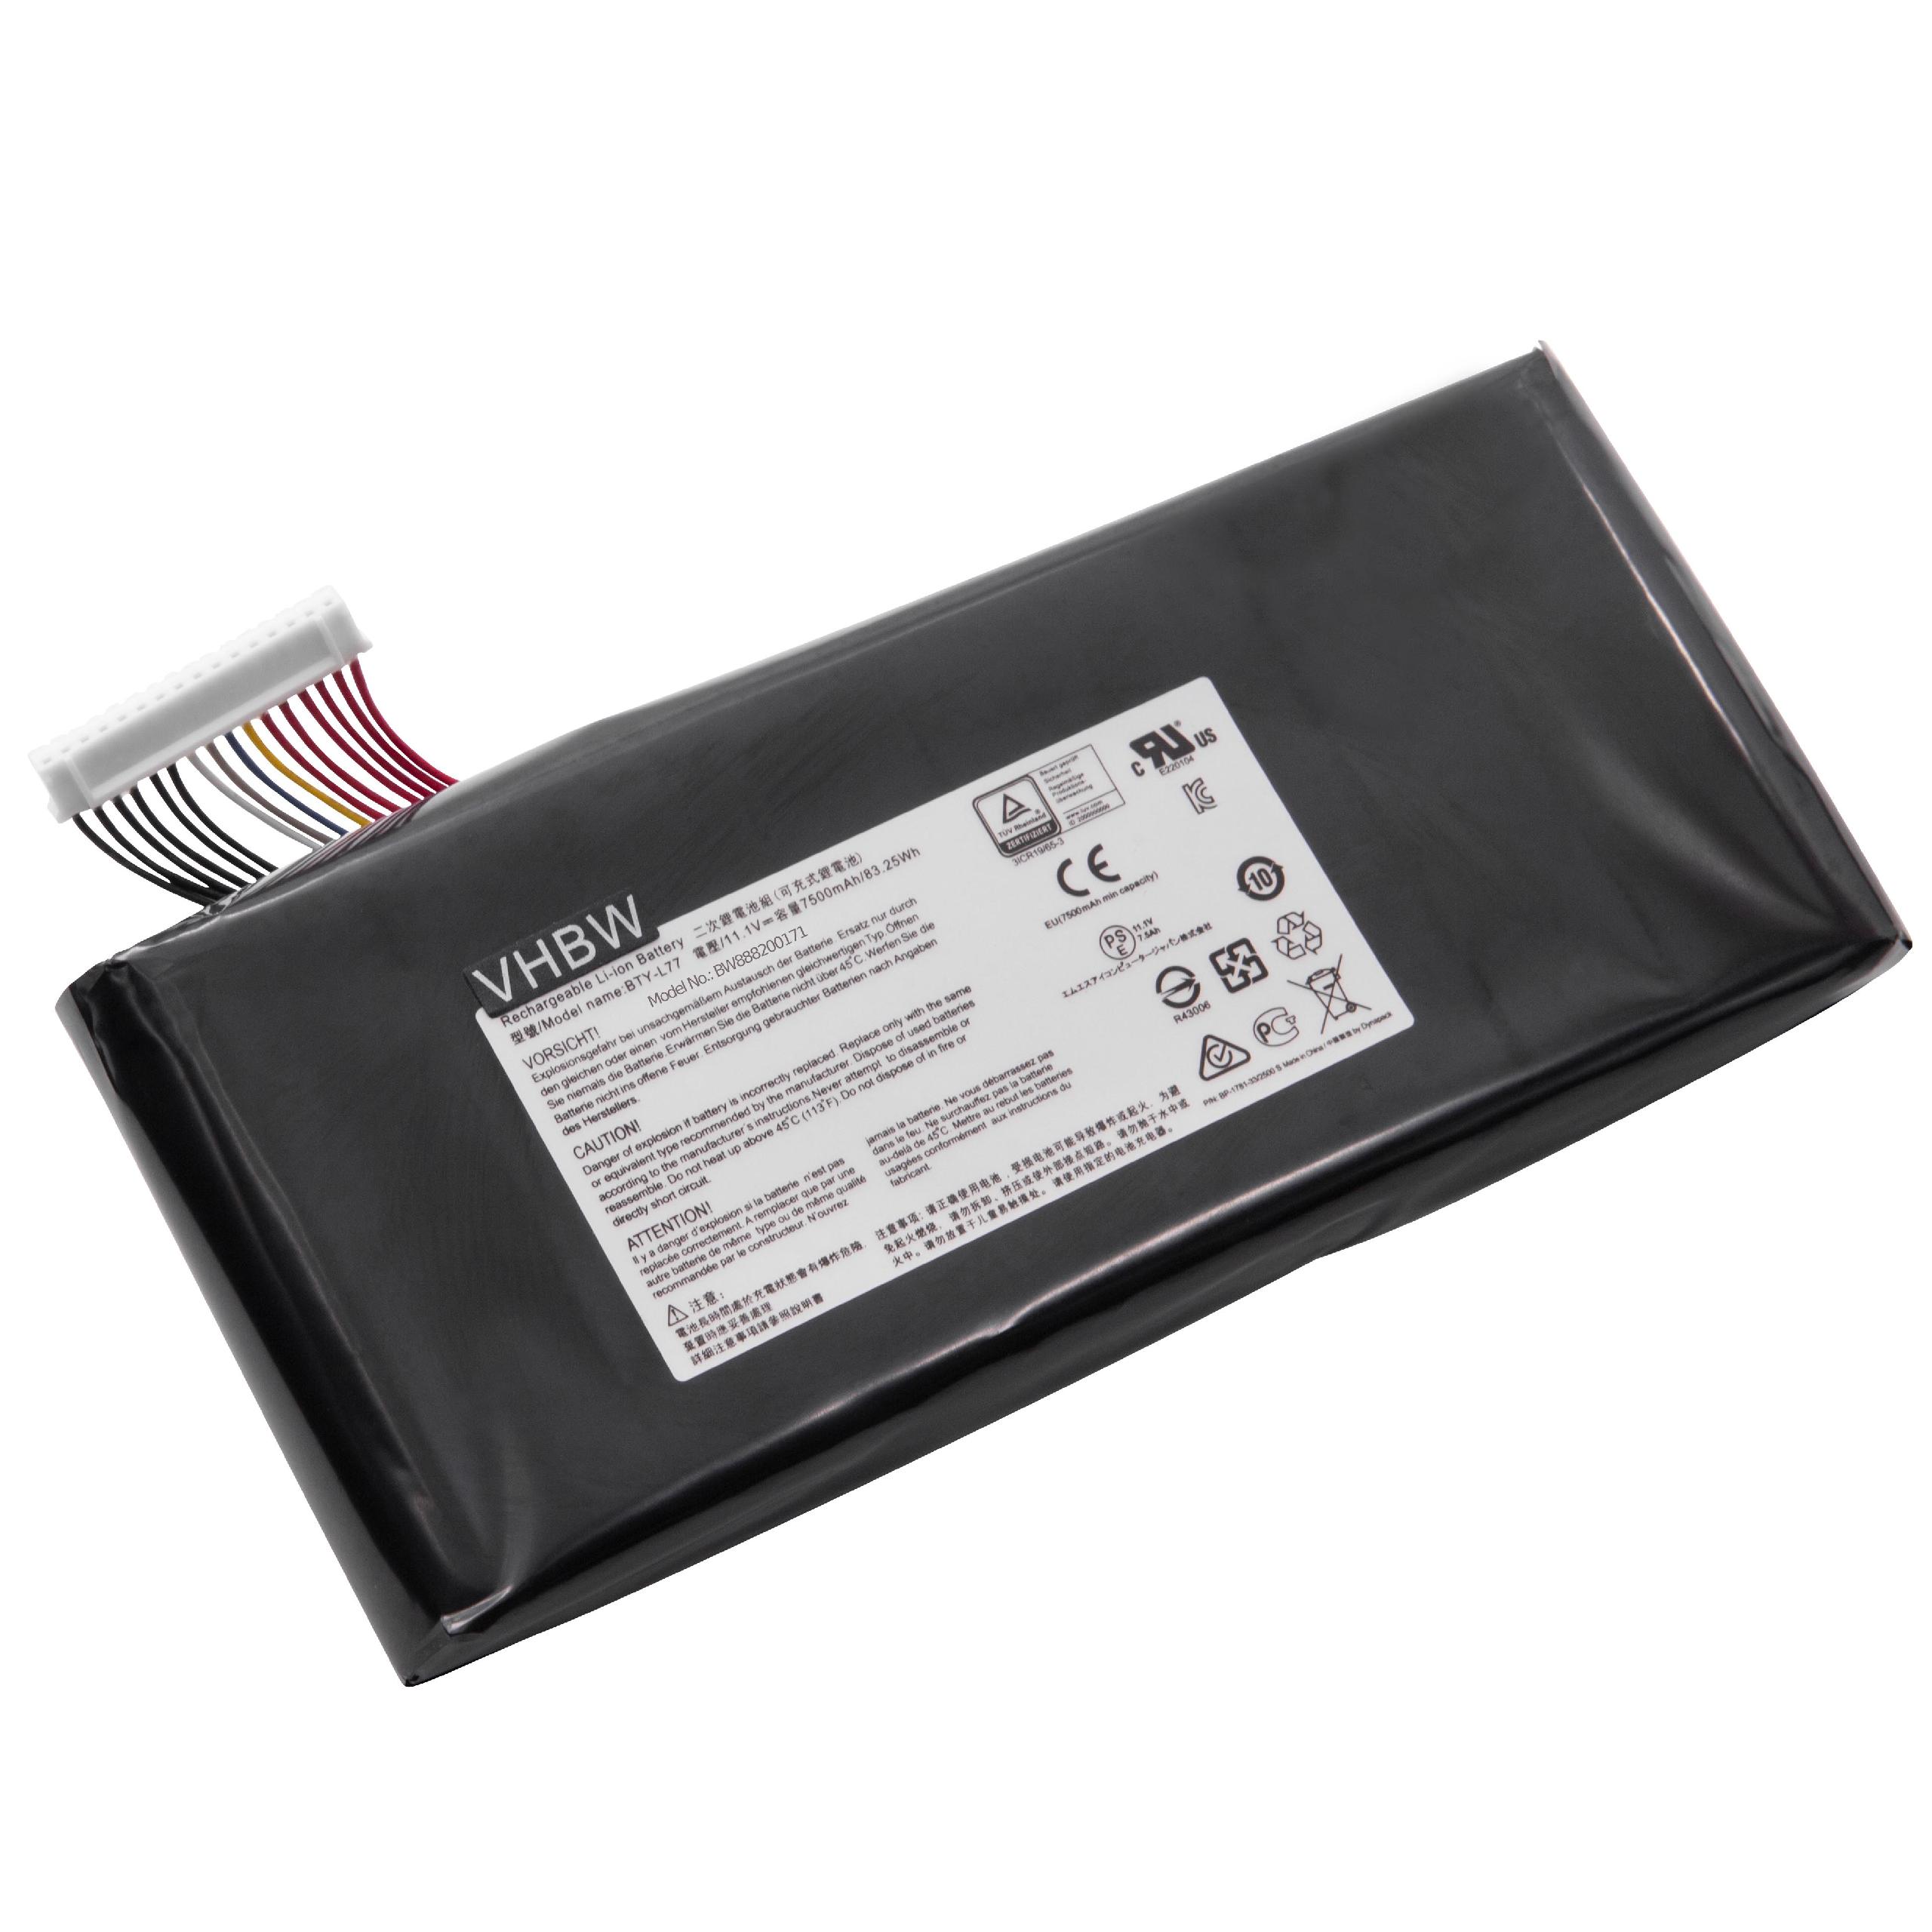 Notebook Battery Replacement for MSI BTY-L77, MS-1784 - 7500mAh 11.1V Li-Ion